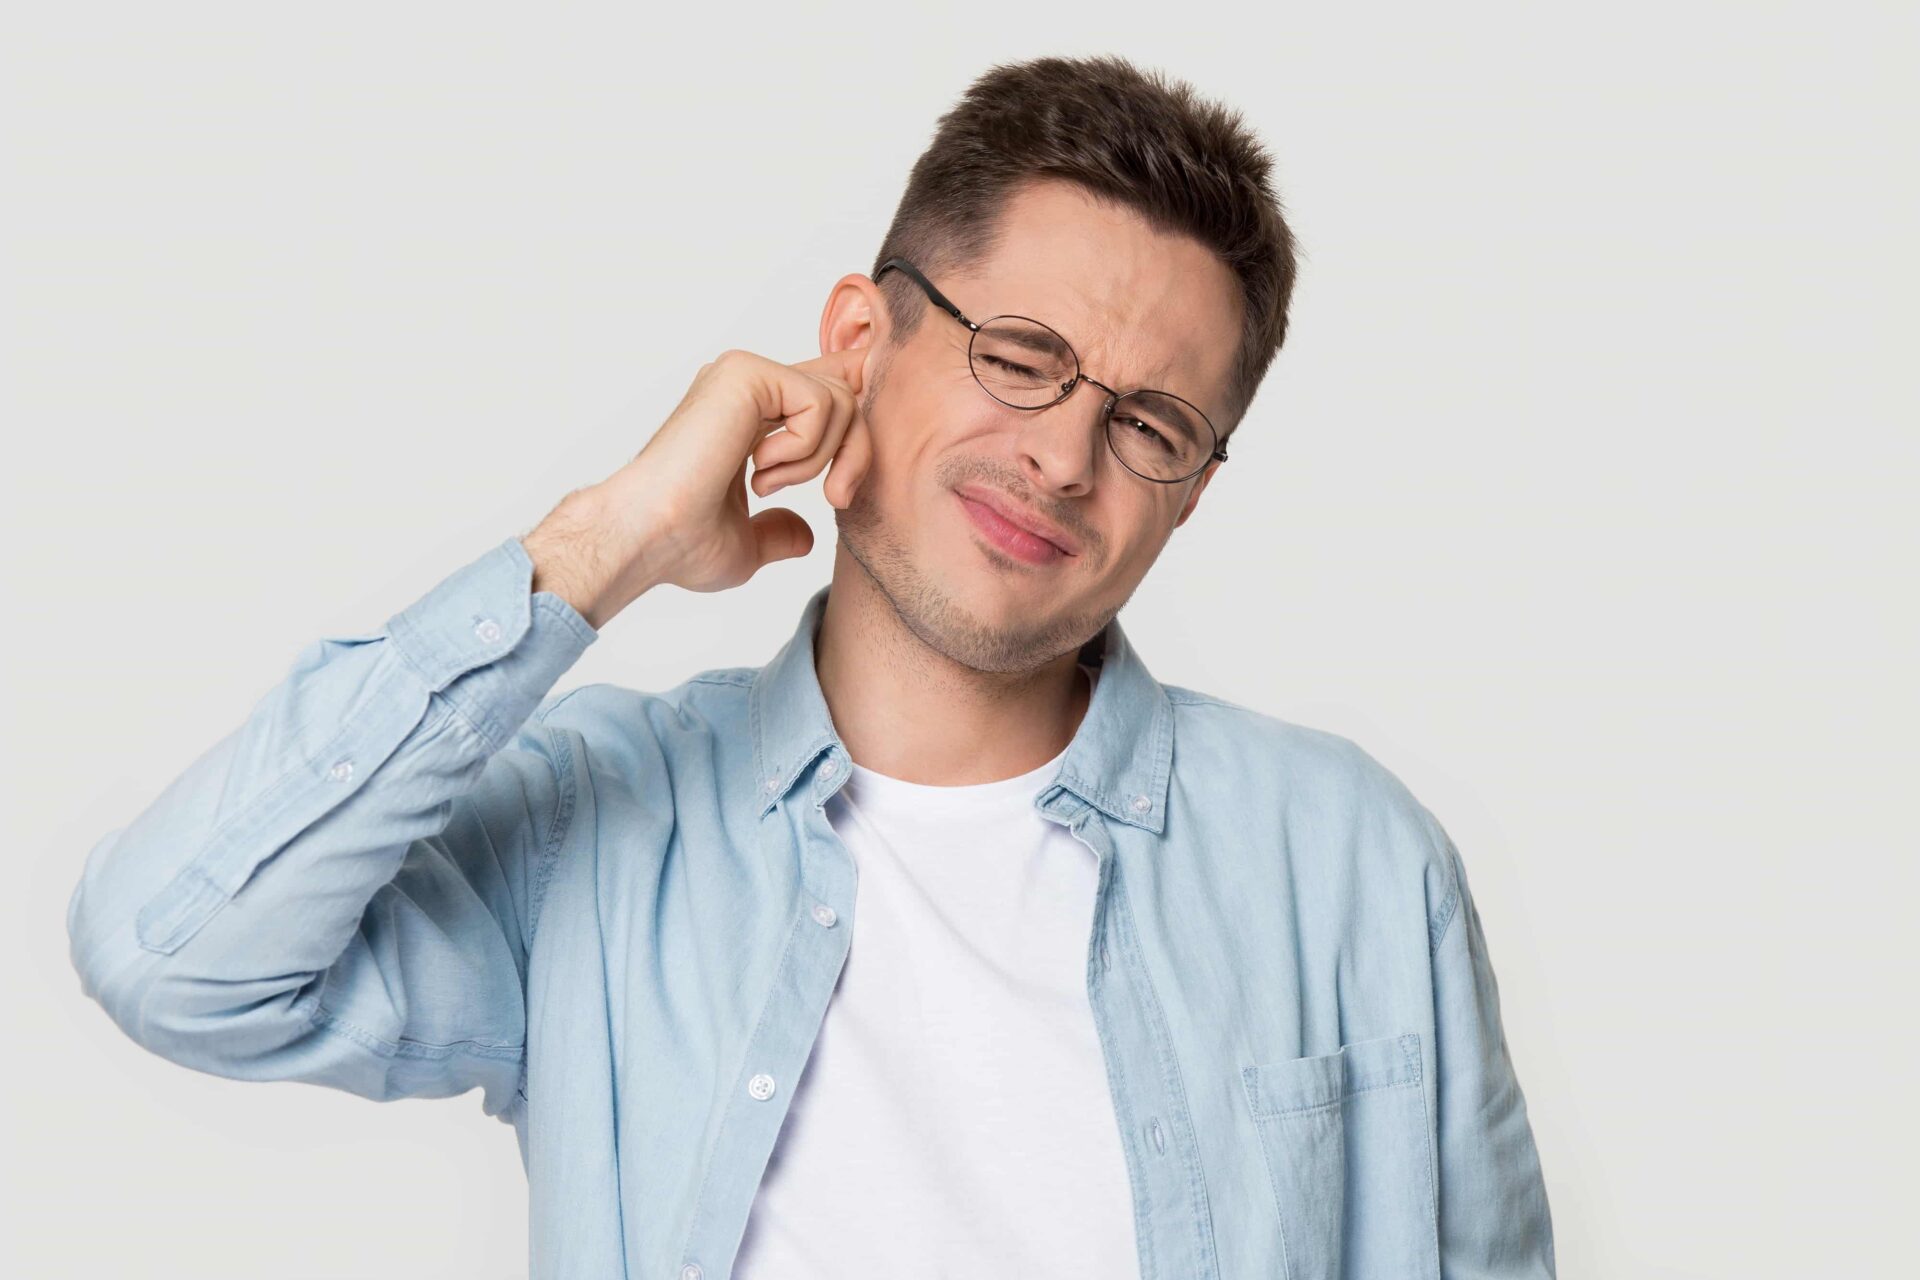 Young man wearing glasses holding his ear out of pain or a crackling in his ear.